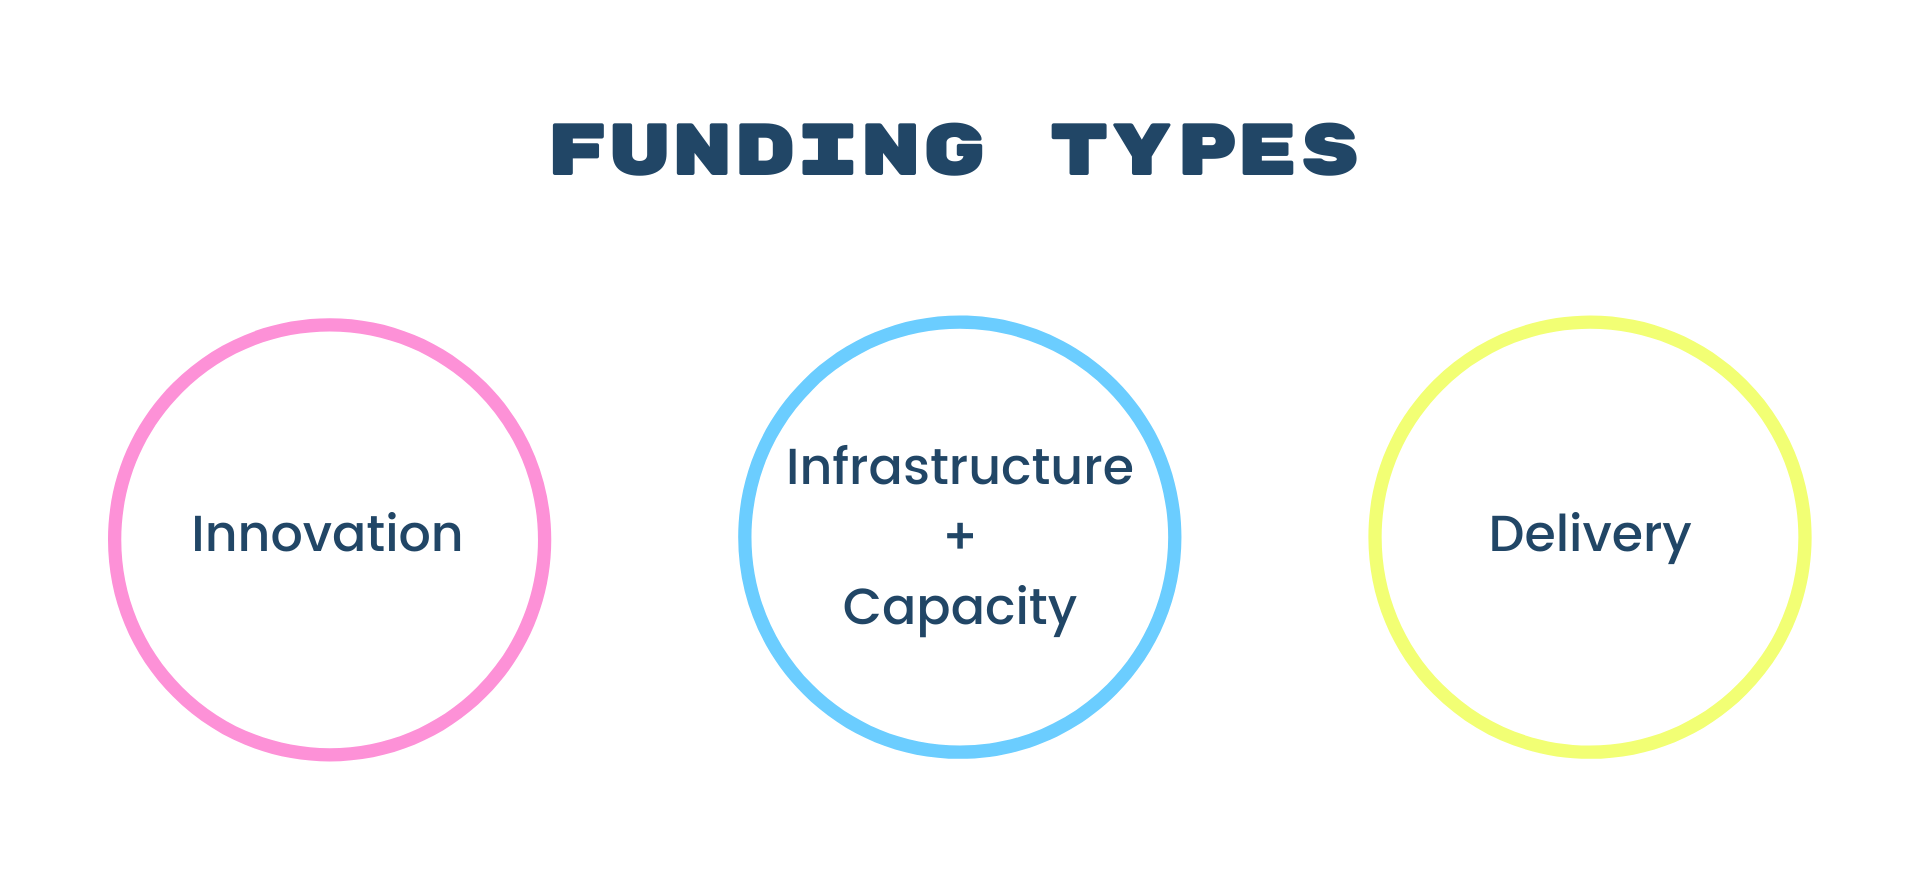 graphic with the title 'Funding types' and three subheadings 'Innovation' 'Infrastructure and capacity' and 'Delivery'